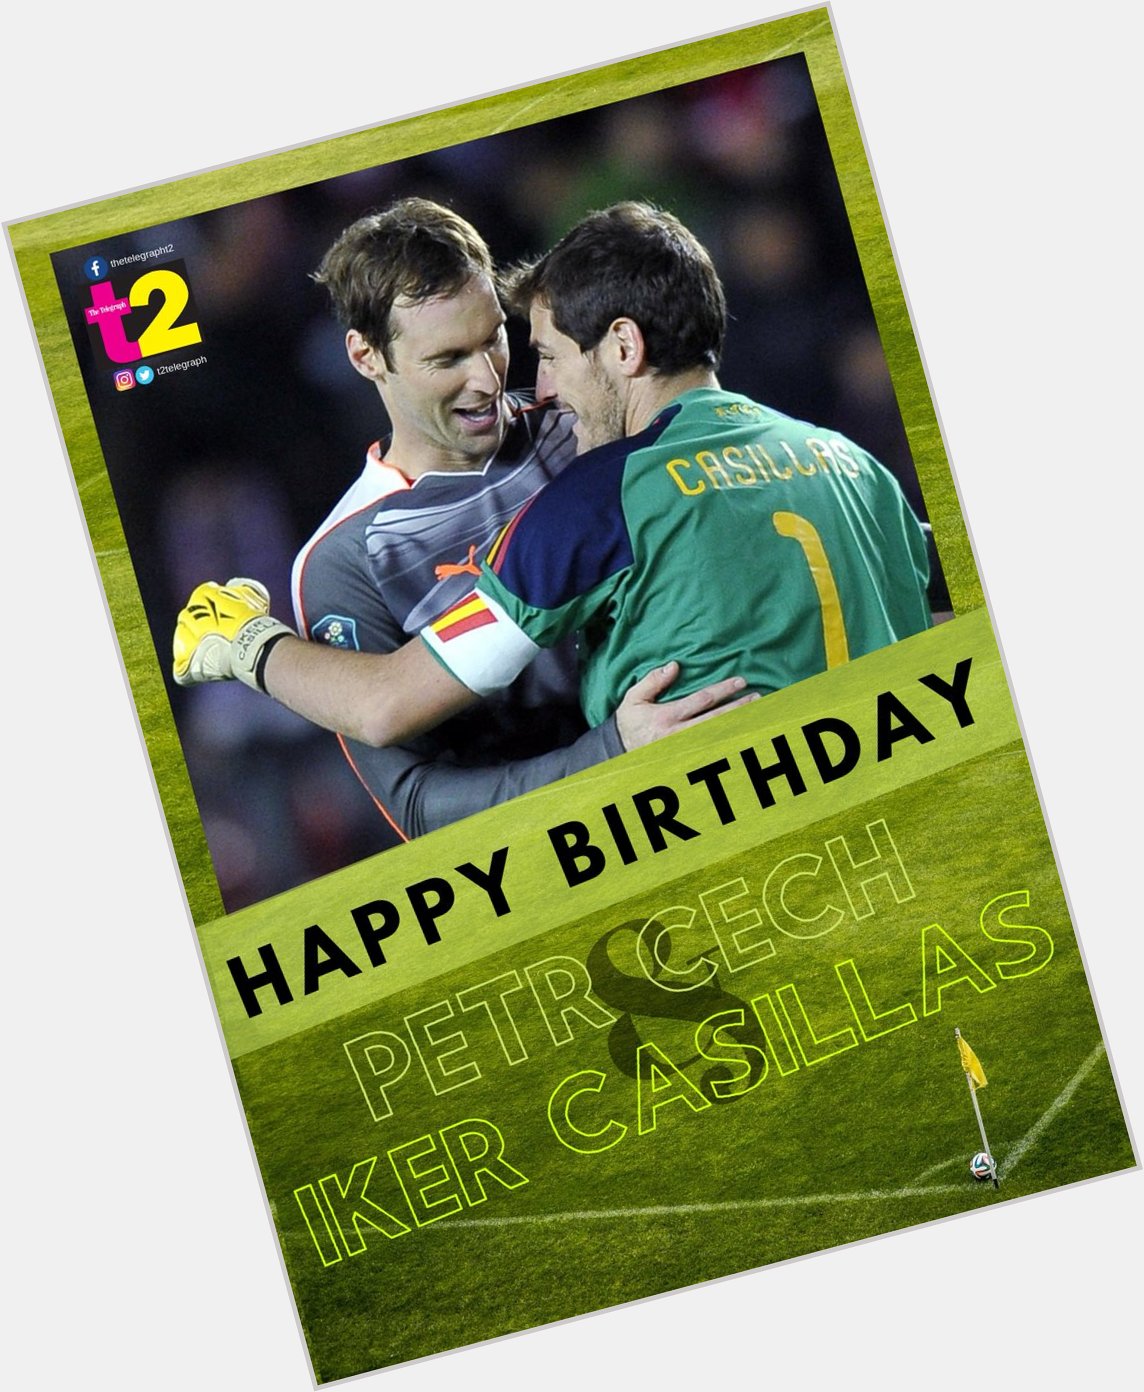 Happy birthday to two of our favourite goalkeepers -- Iker Casillas and Petr Cech  